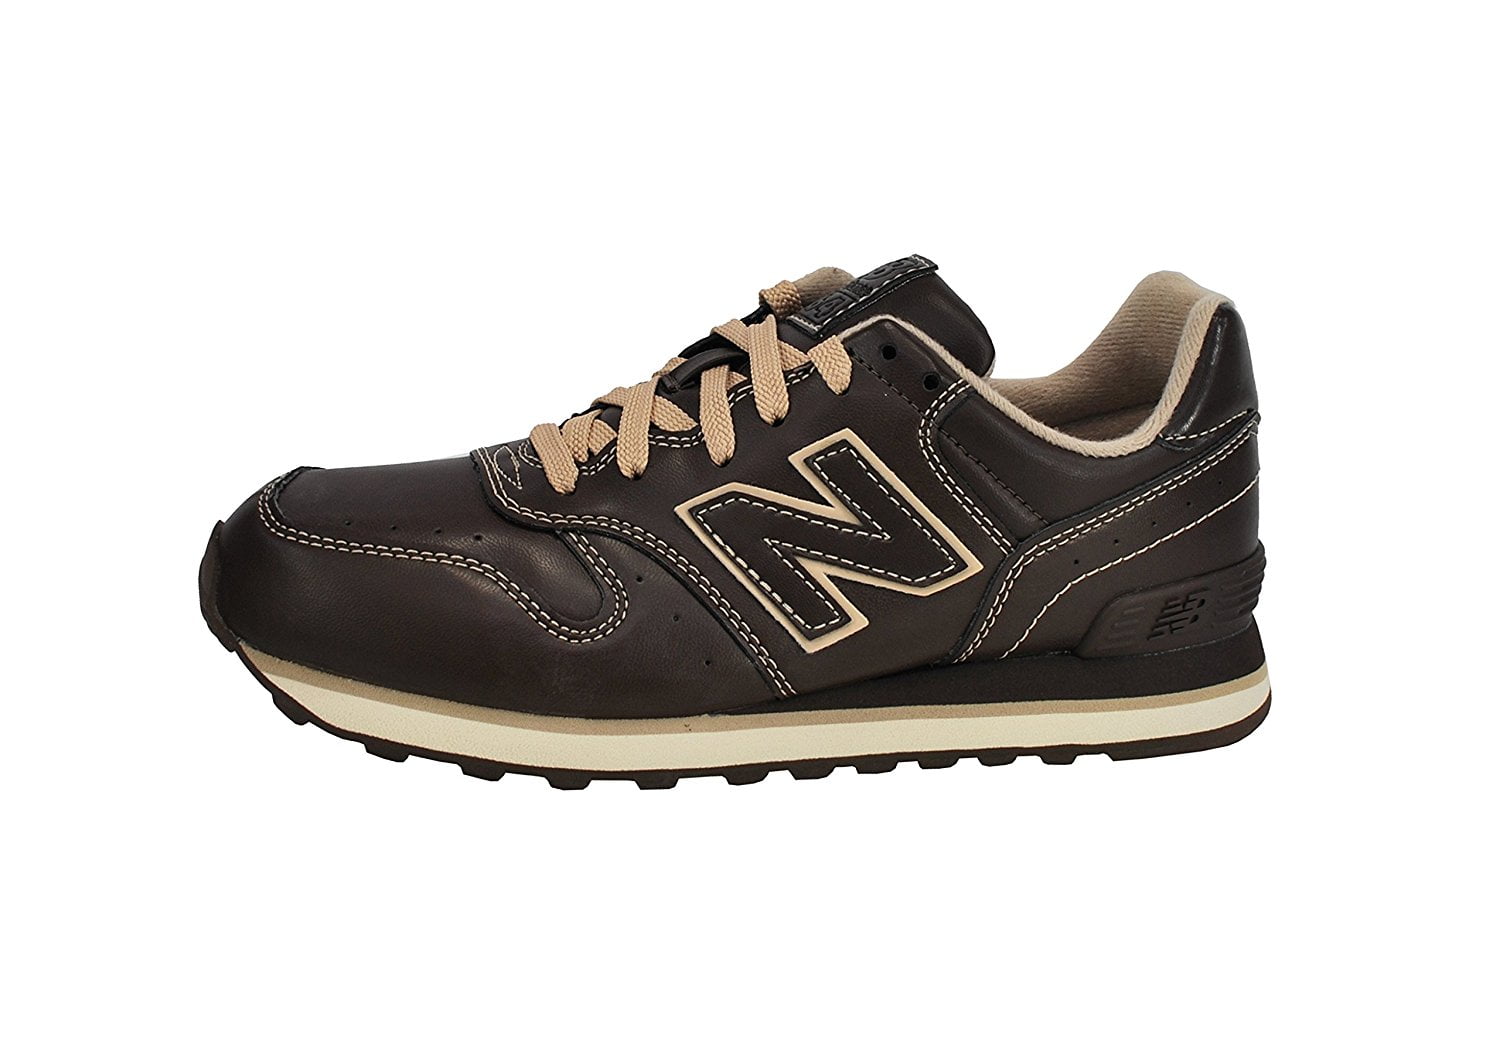 Buy women's black and brown new balance> OFF-50%